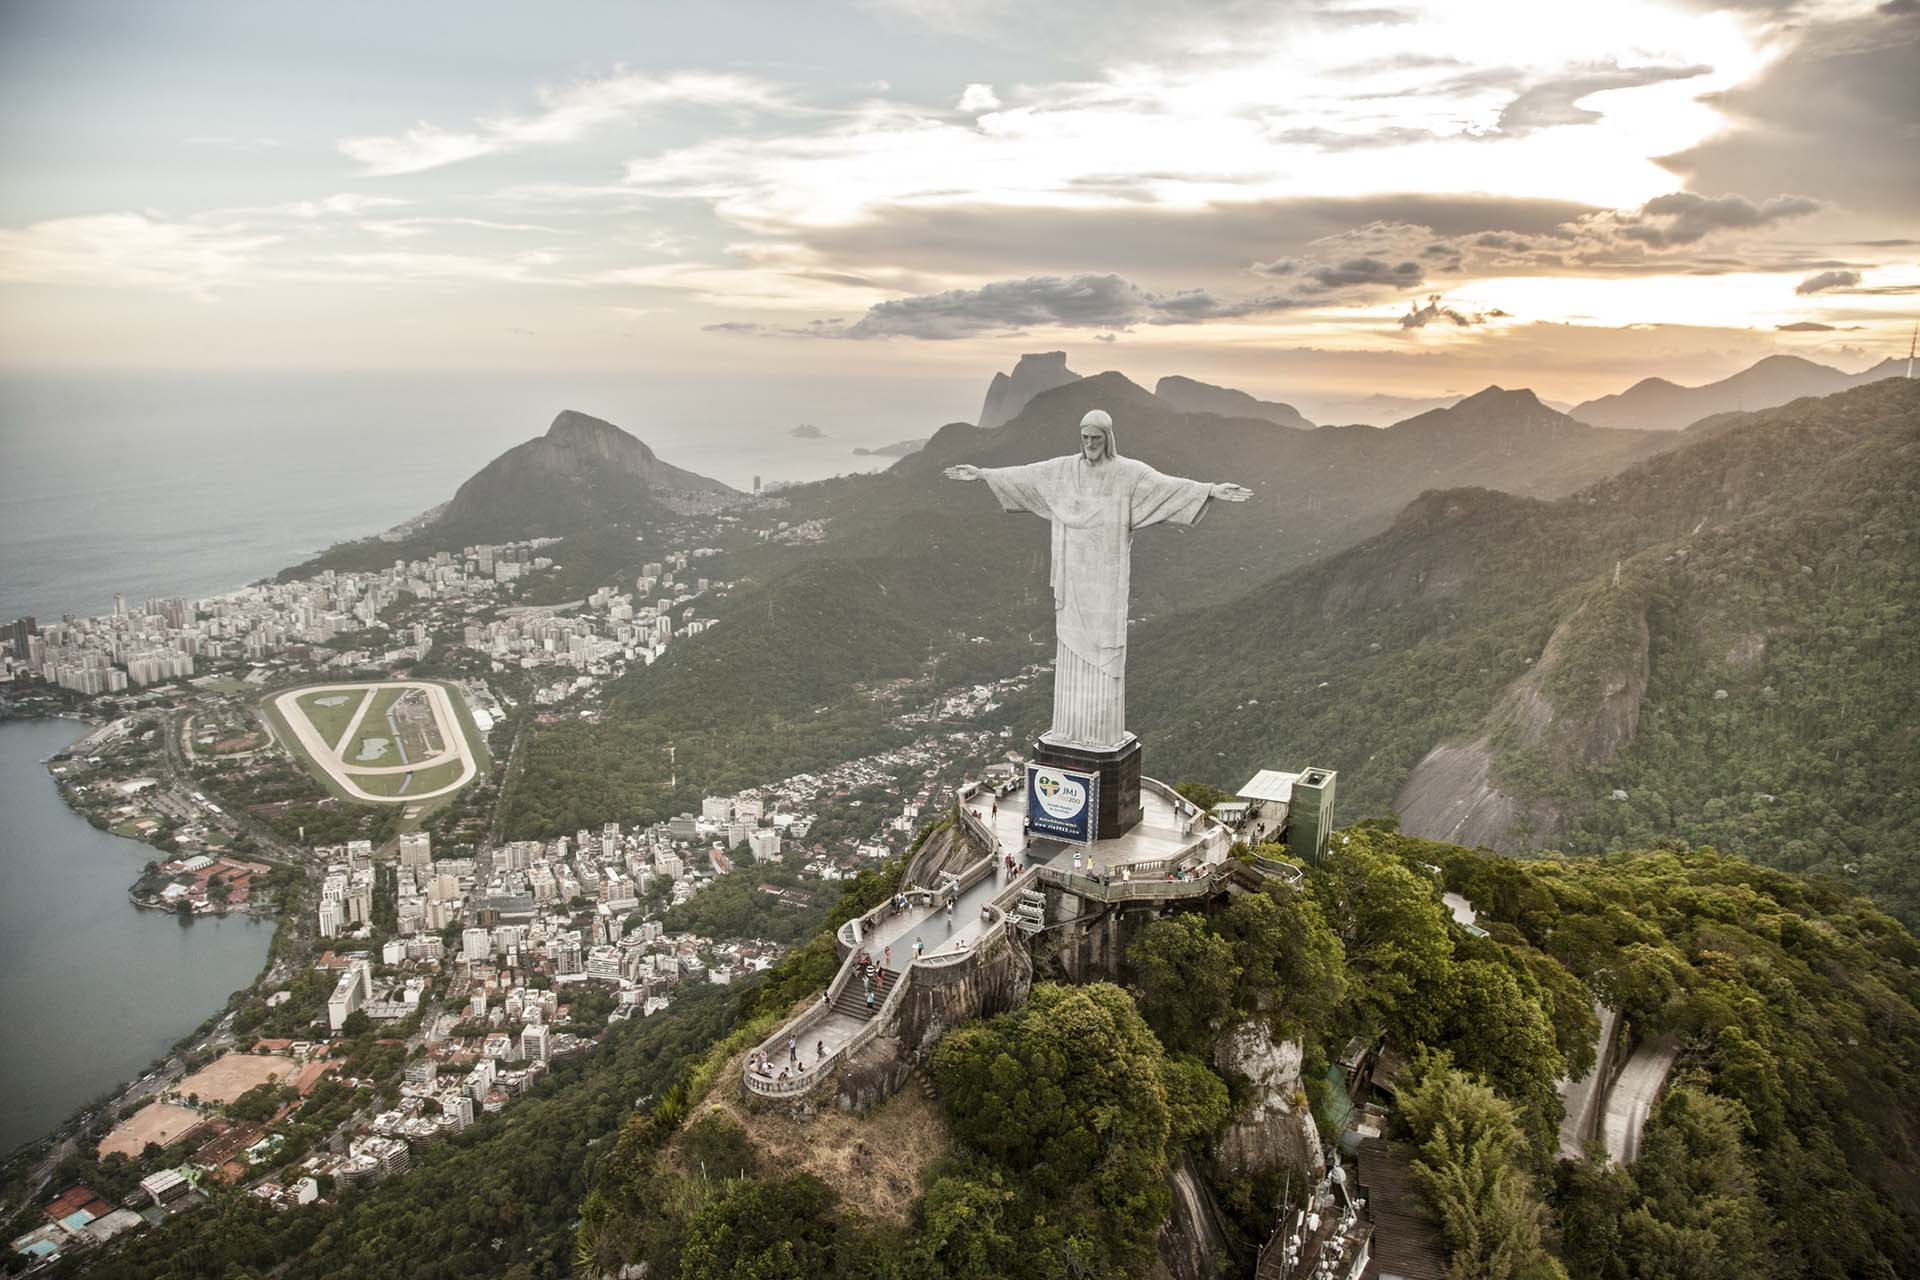 The oldest cities in Latin America, such as Rio de Janeiro, were founded in coastal areas